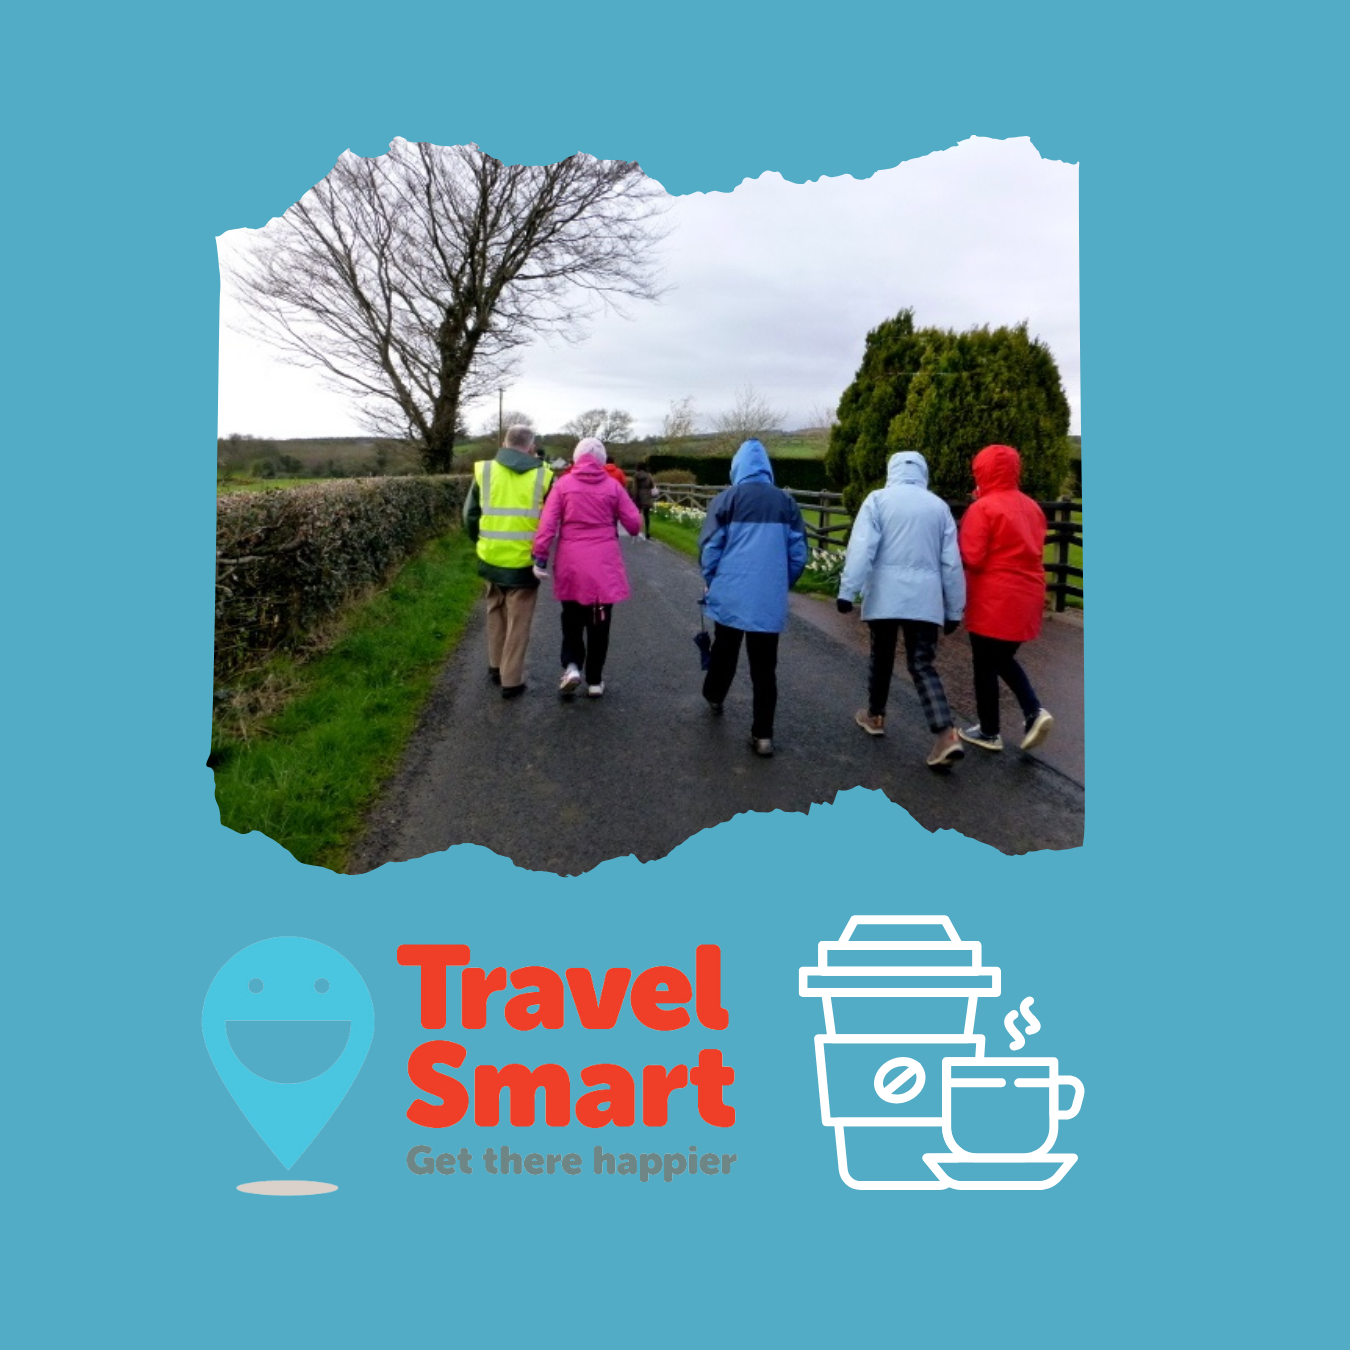 Travel Smart Wednesday Walk and Talk and Hot Drink poster with coffee cup icon and pic of people walking together in countryside